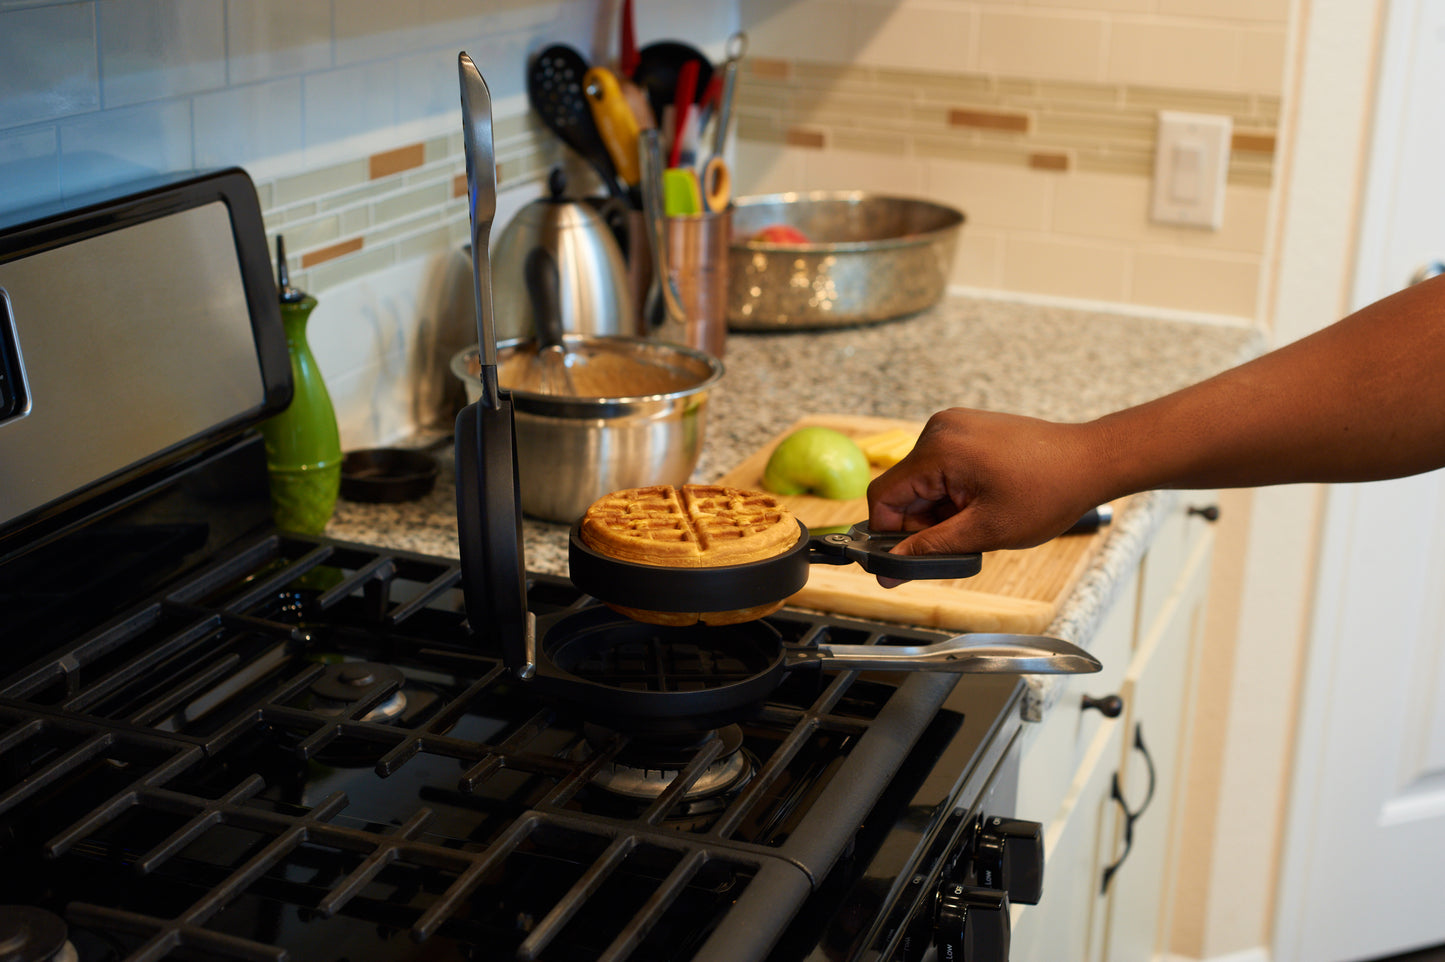 We love that the stuffed waffle iron allows for so much CREATIVITY